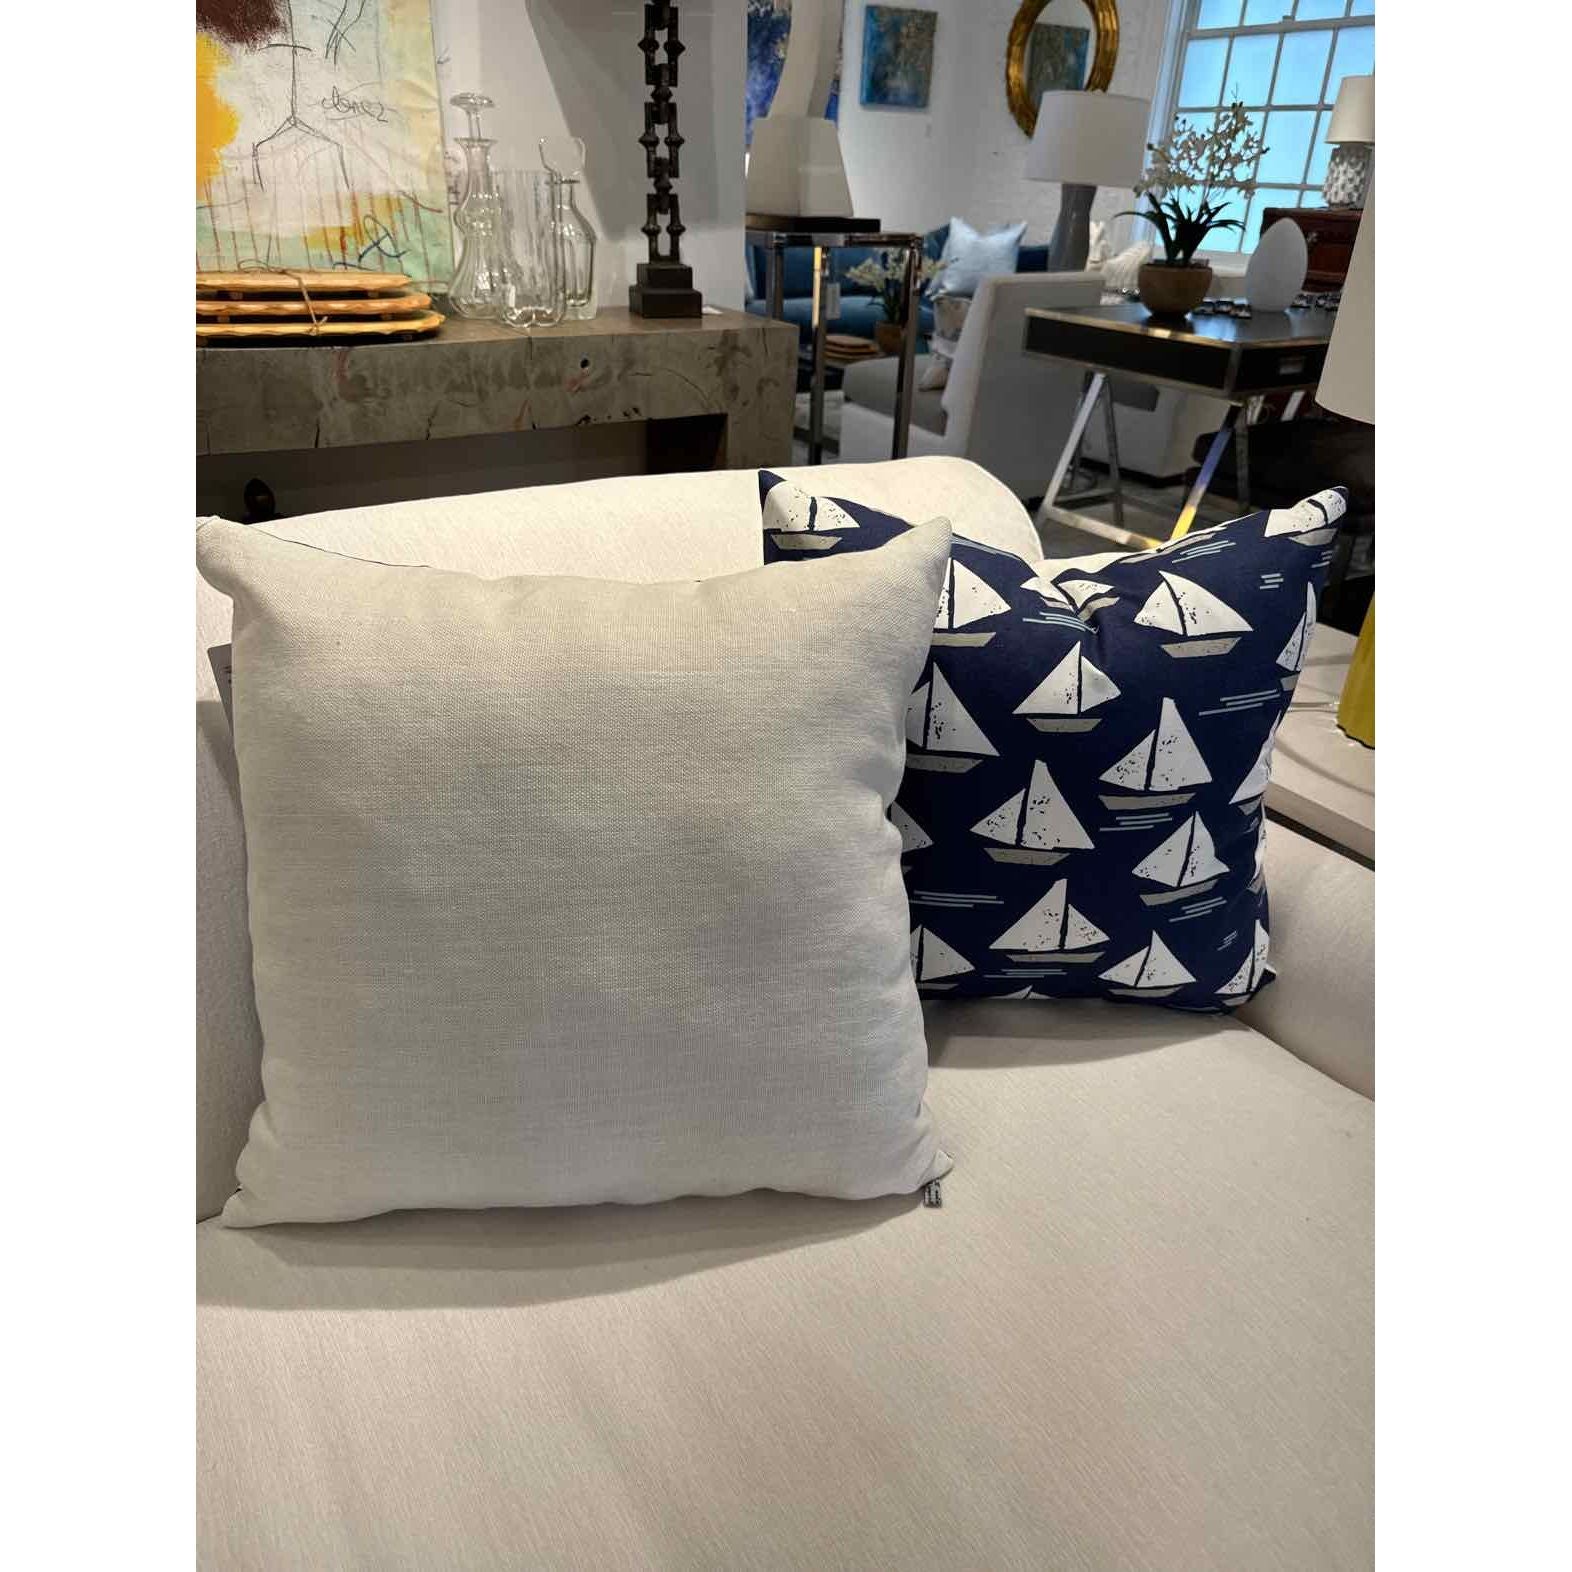 Pair of Sail Boats Over Blue Square Outdoor/Indoor Pillows 20"x20"